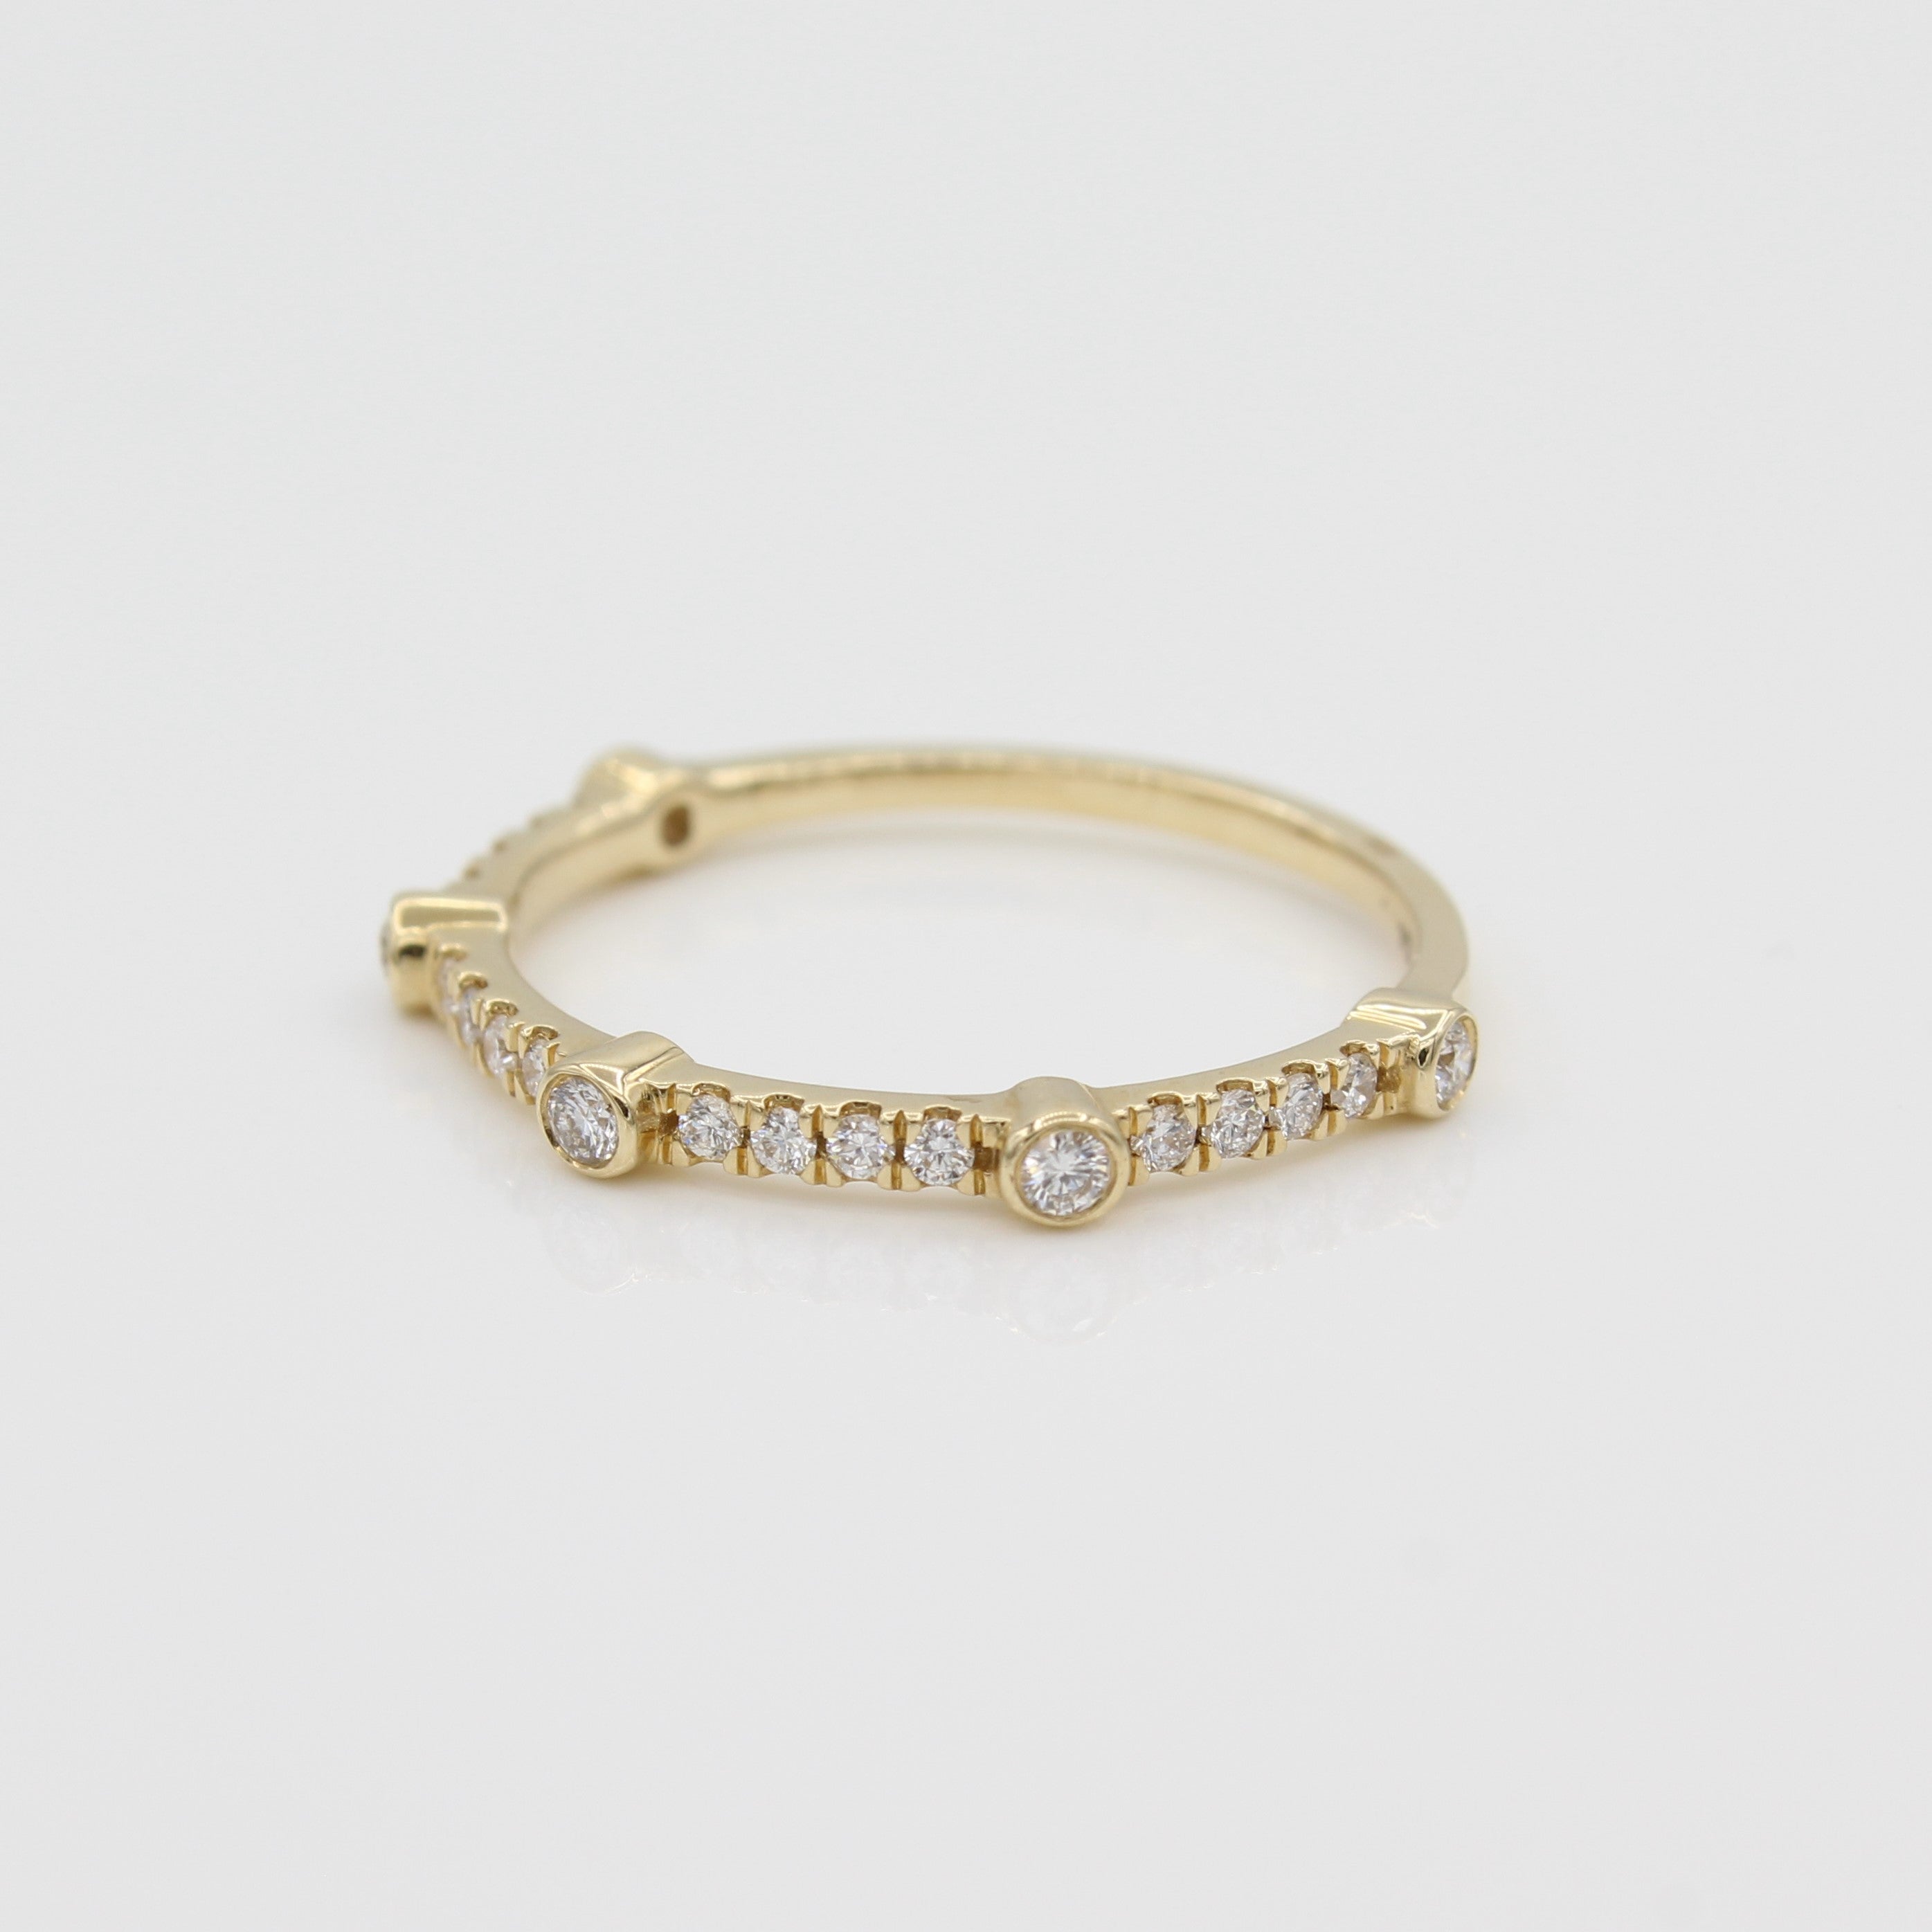 14k Yellow Gold Bezel-Set Diamond 5 Station Ring with Micro-Pave Band, side view from right.